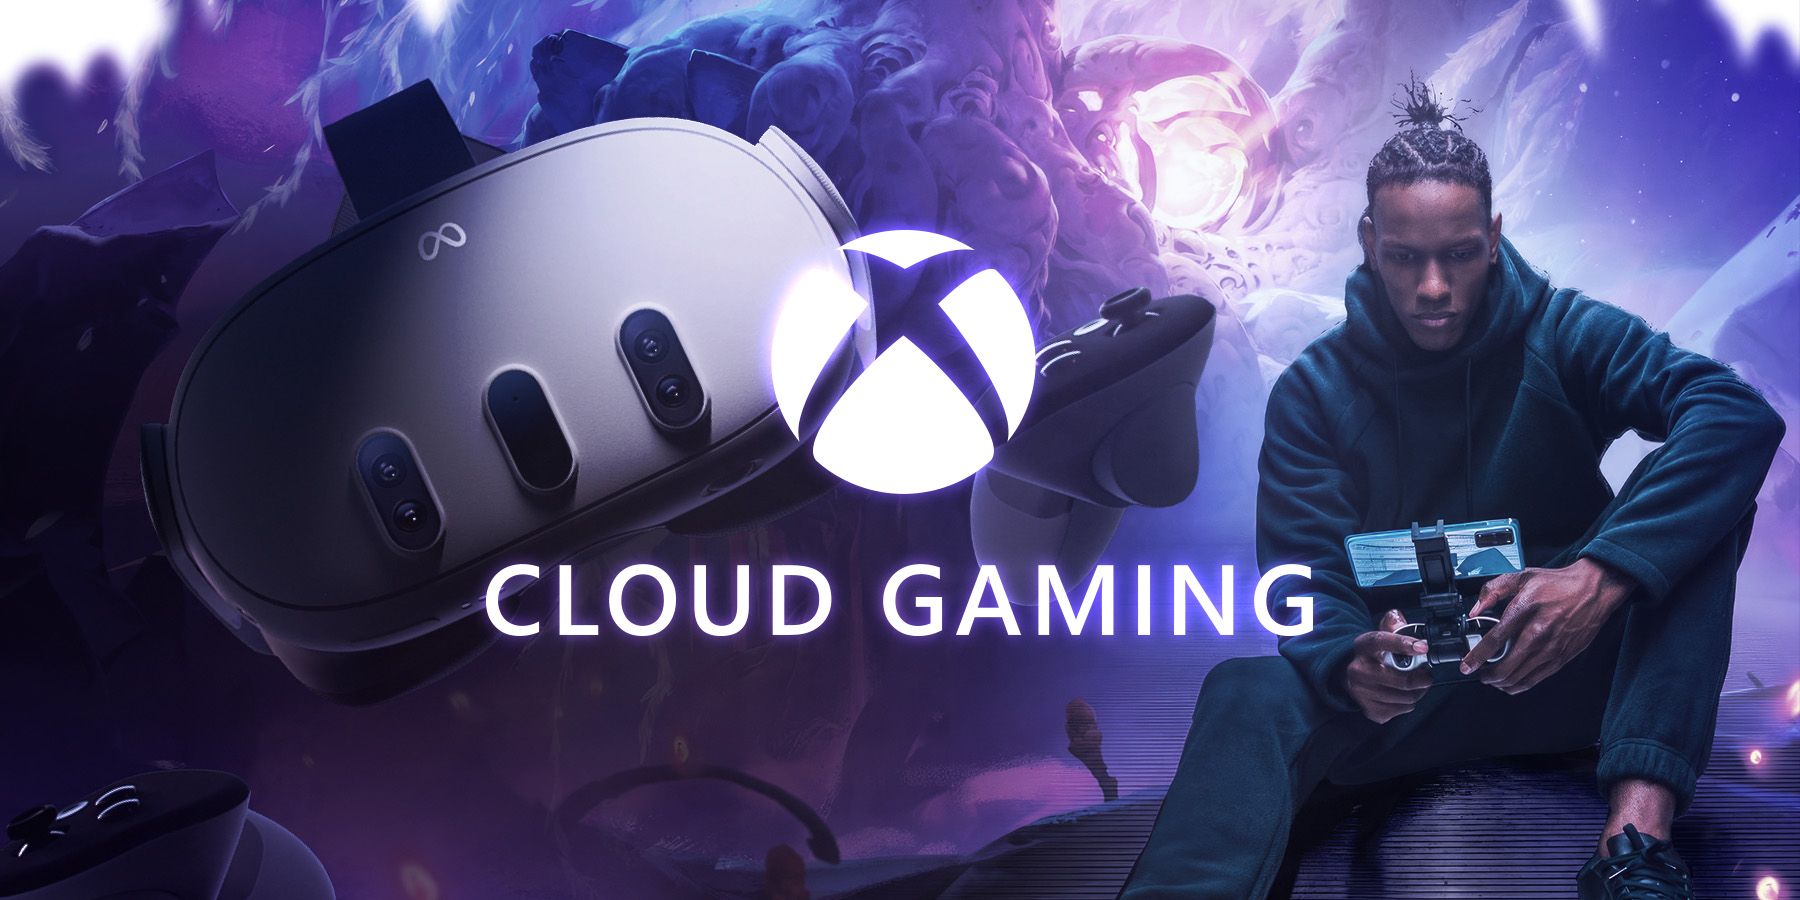 Xbox Cloud Gaming Is Finally Available on Meta Quest Headsets - IGN